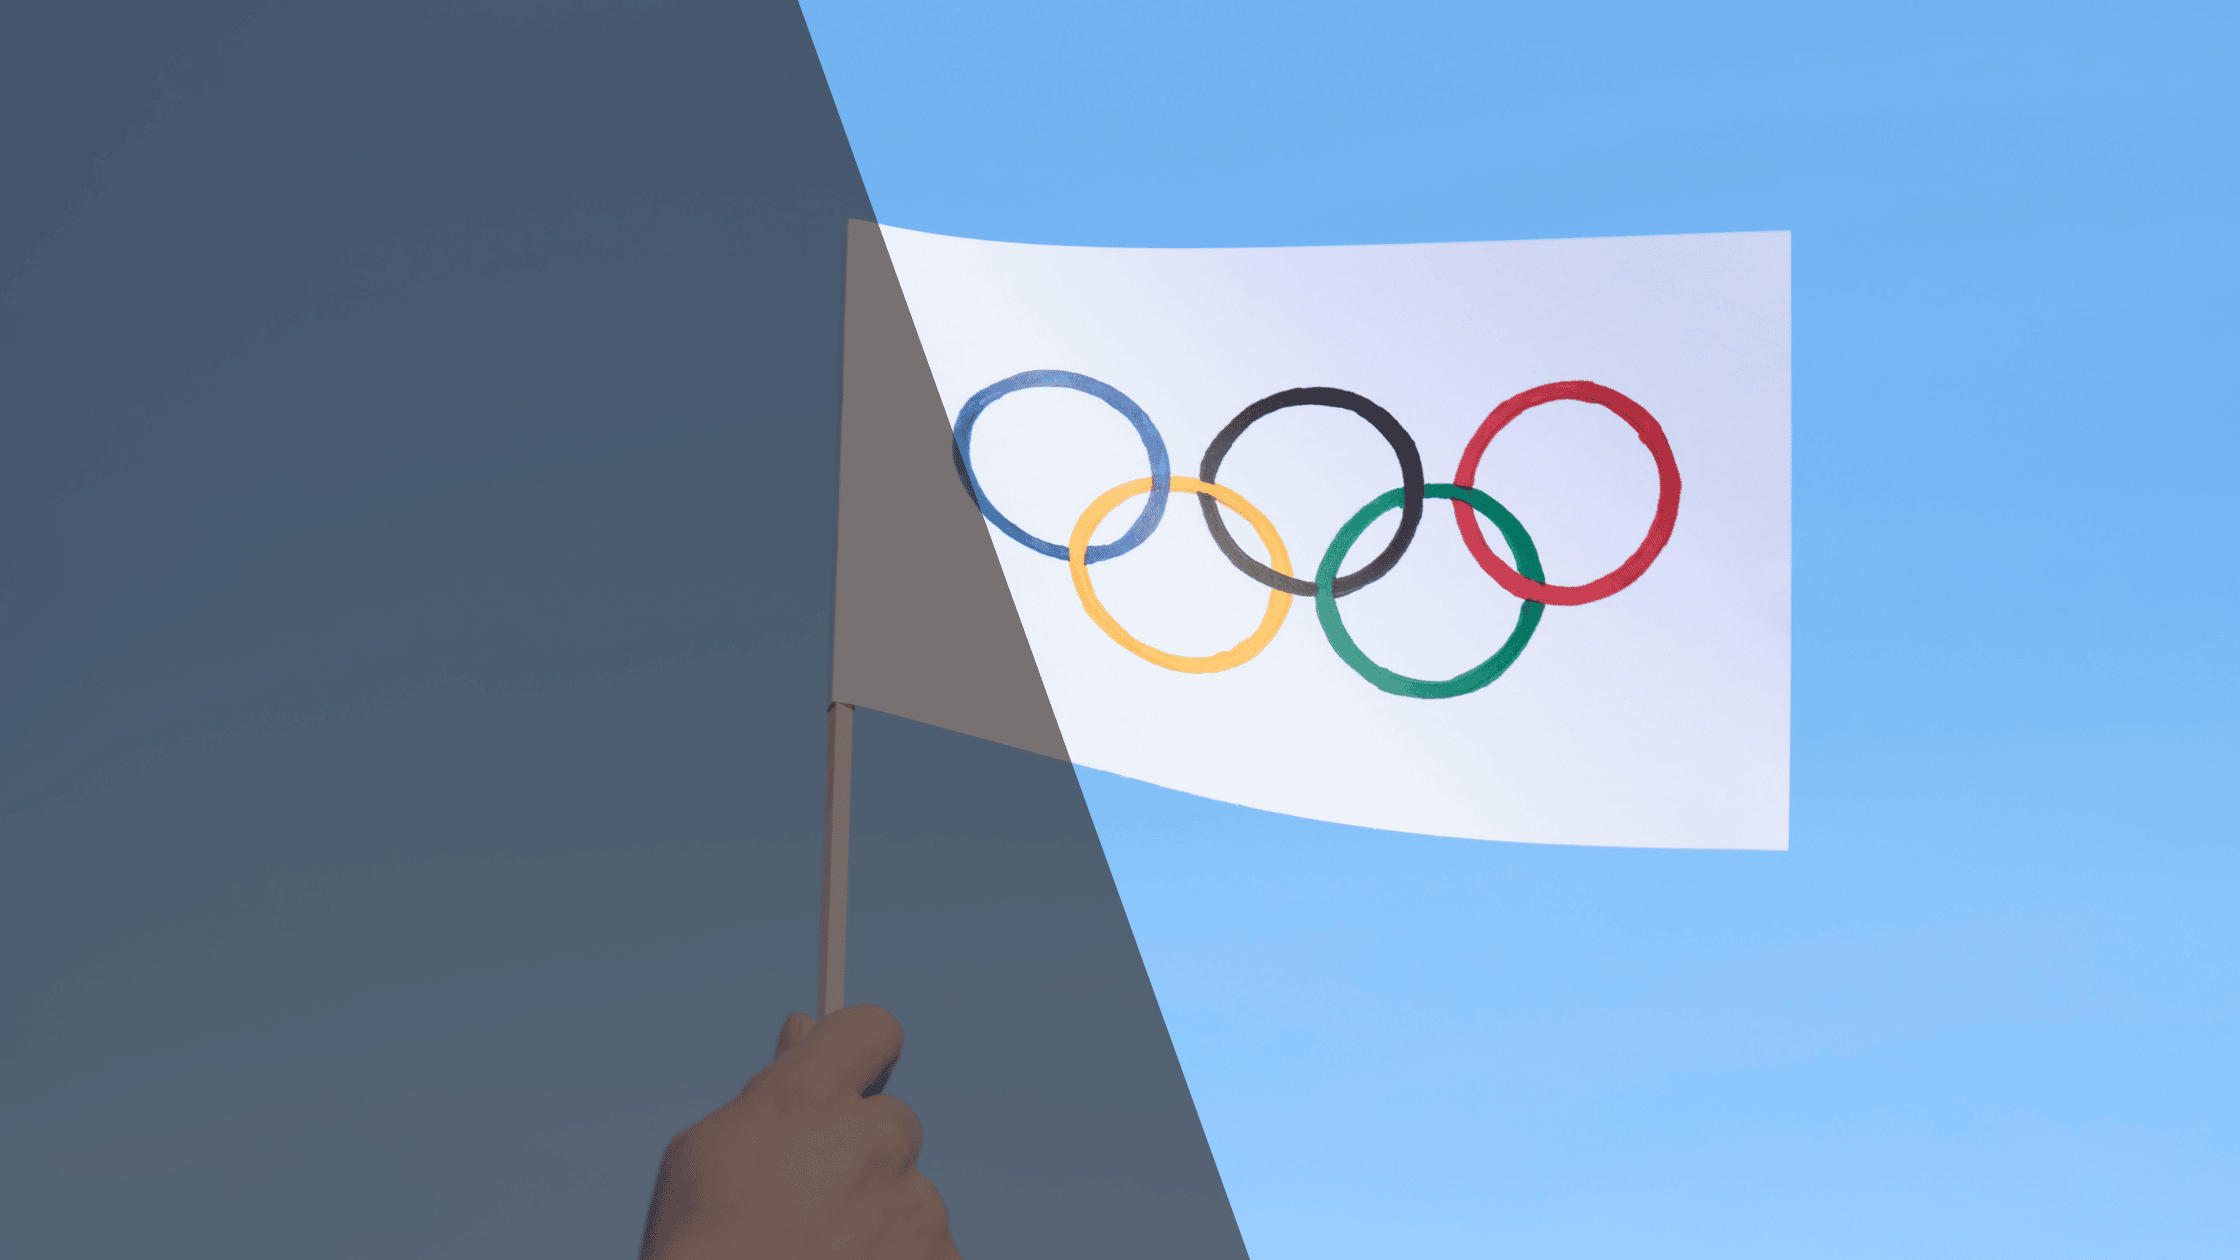 3 Surprising Ways Ransom Attacks Could Destroy the 2022 Olympic Games